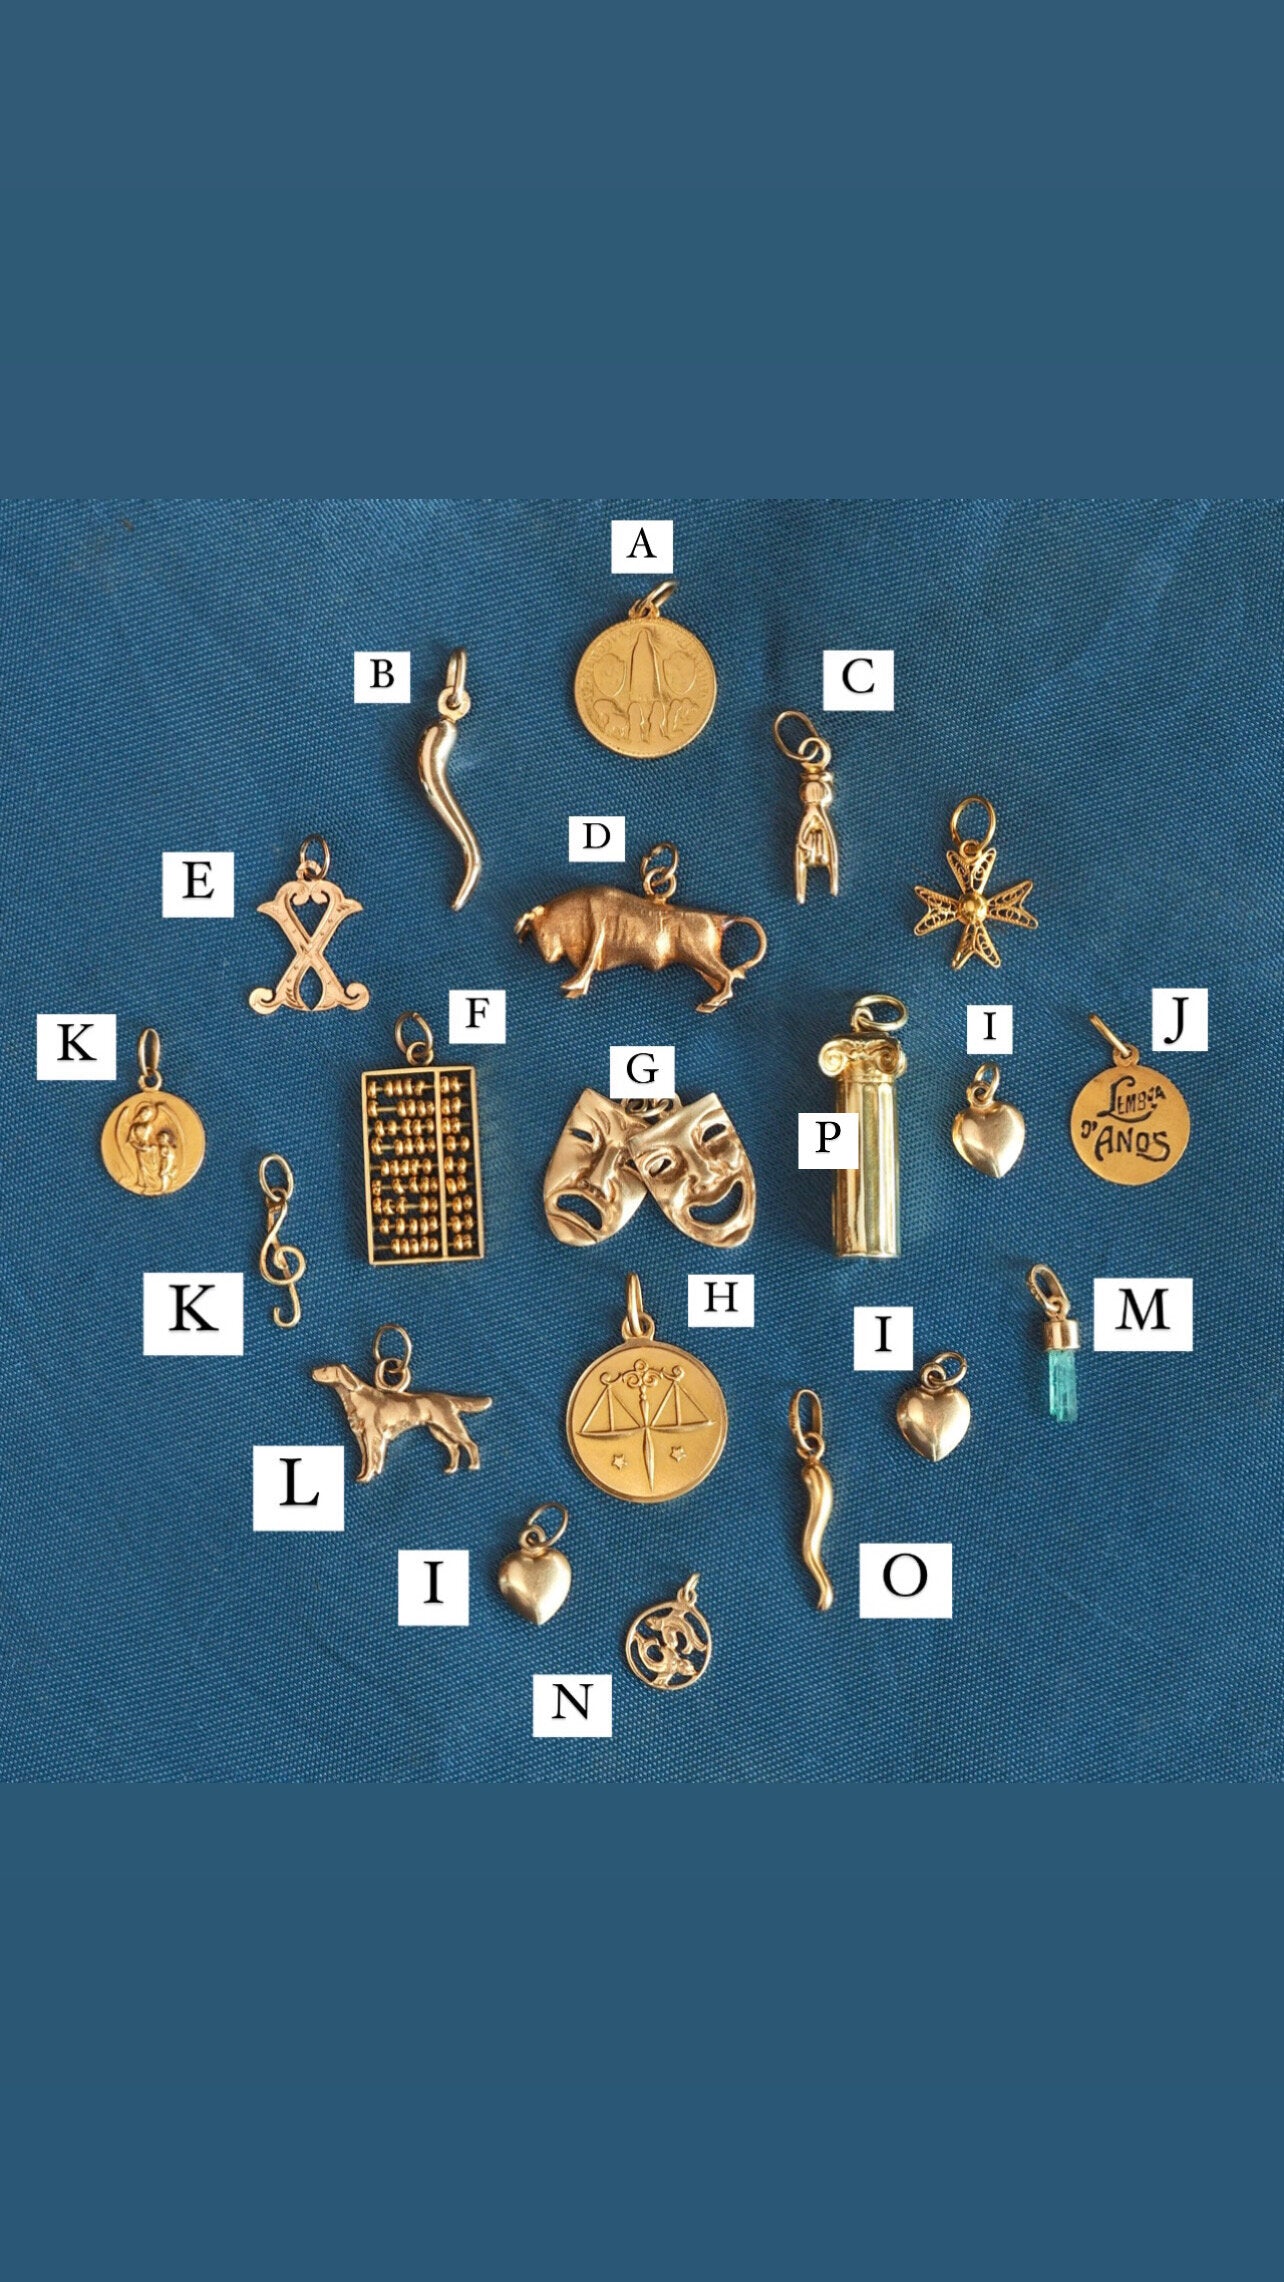 Antique and Vintage Gold Charms